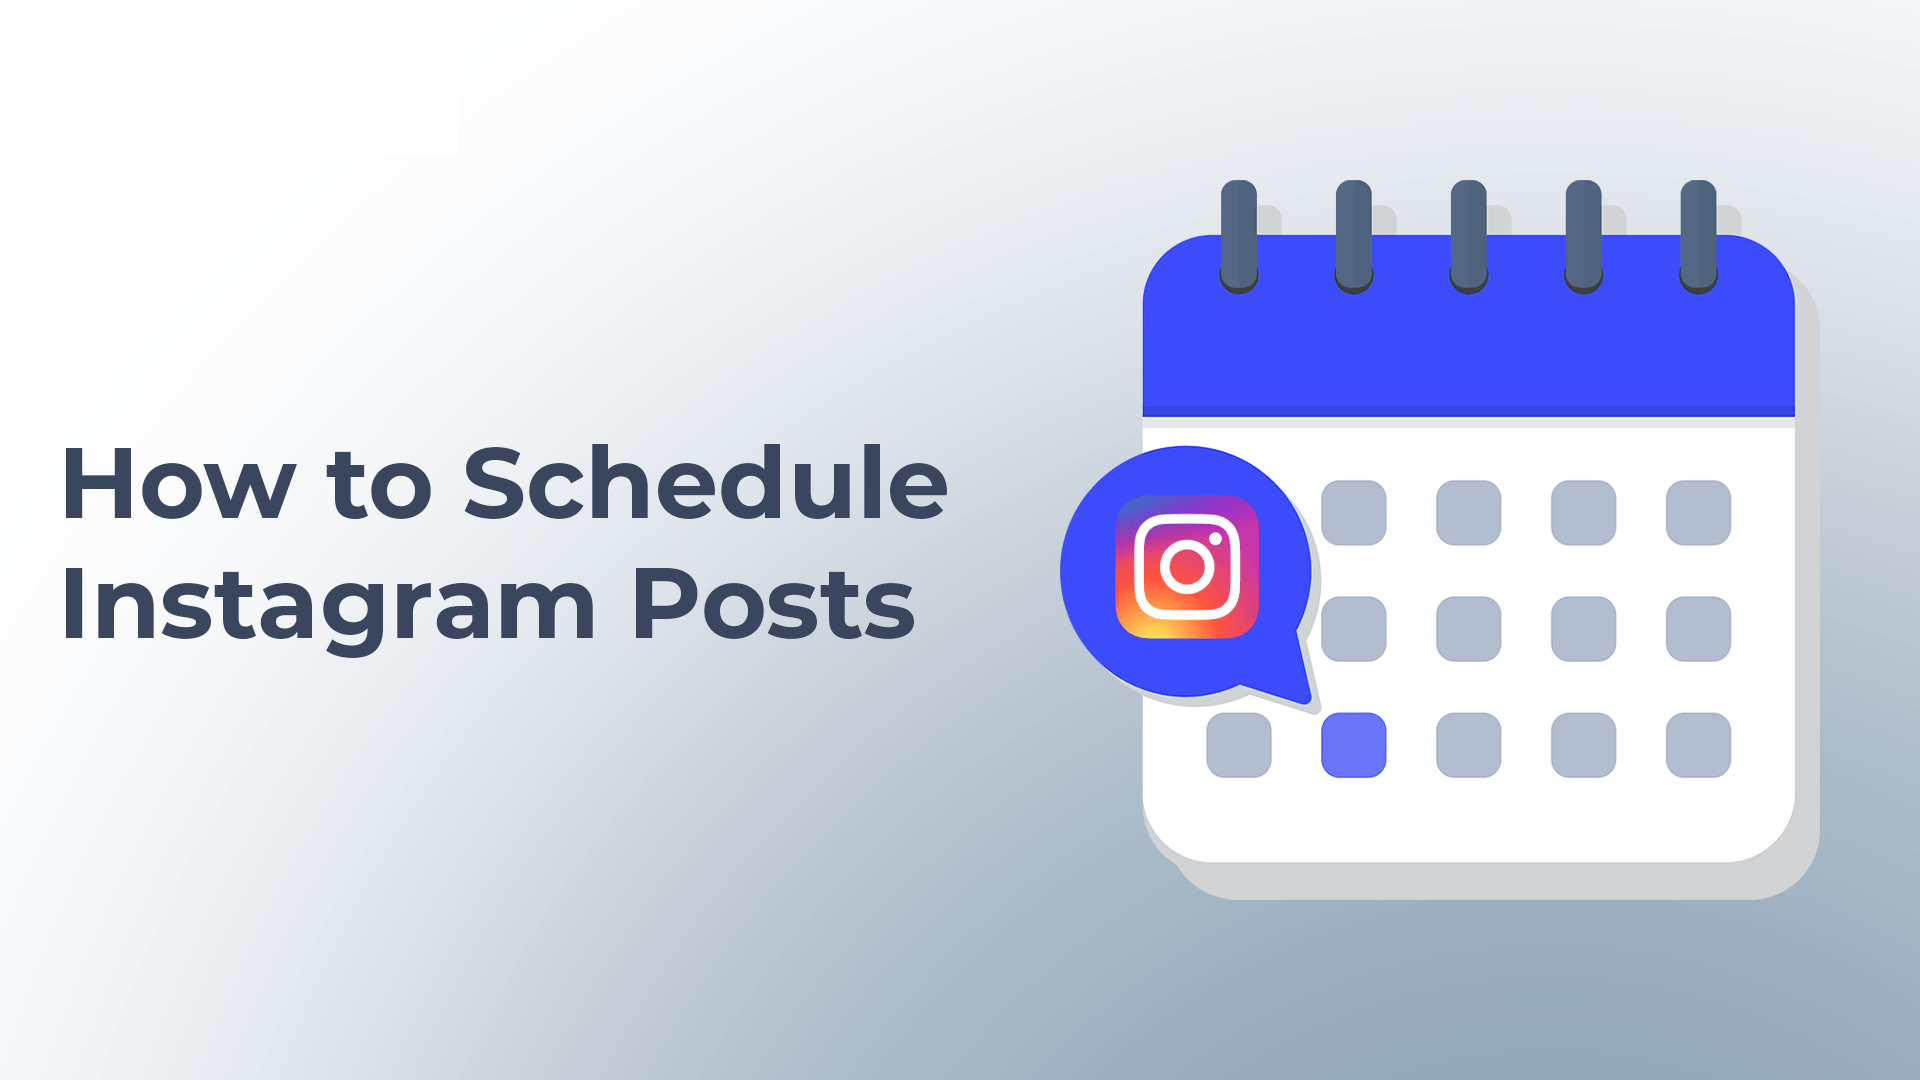 How to Schedule Instagram Posts without Using 3rd Party Tools